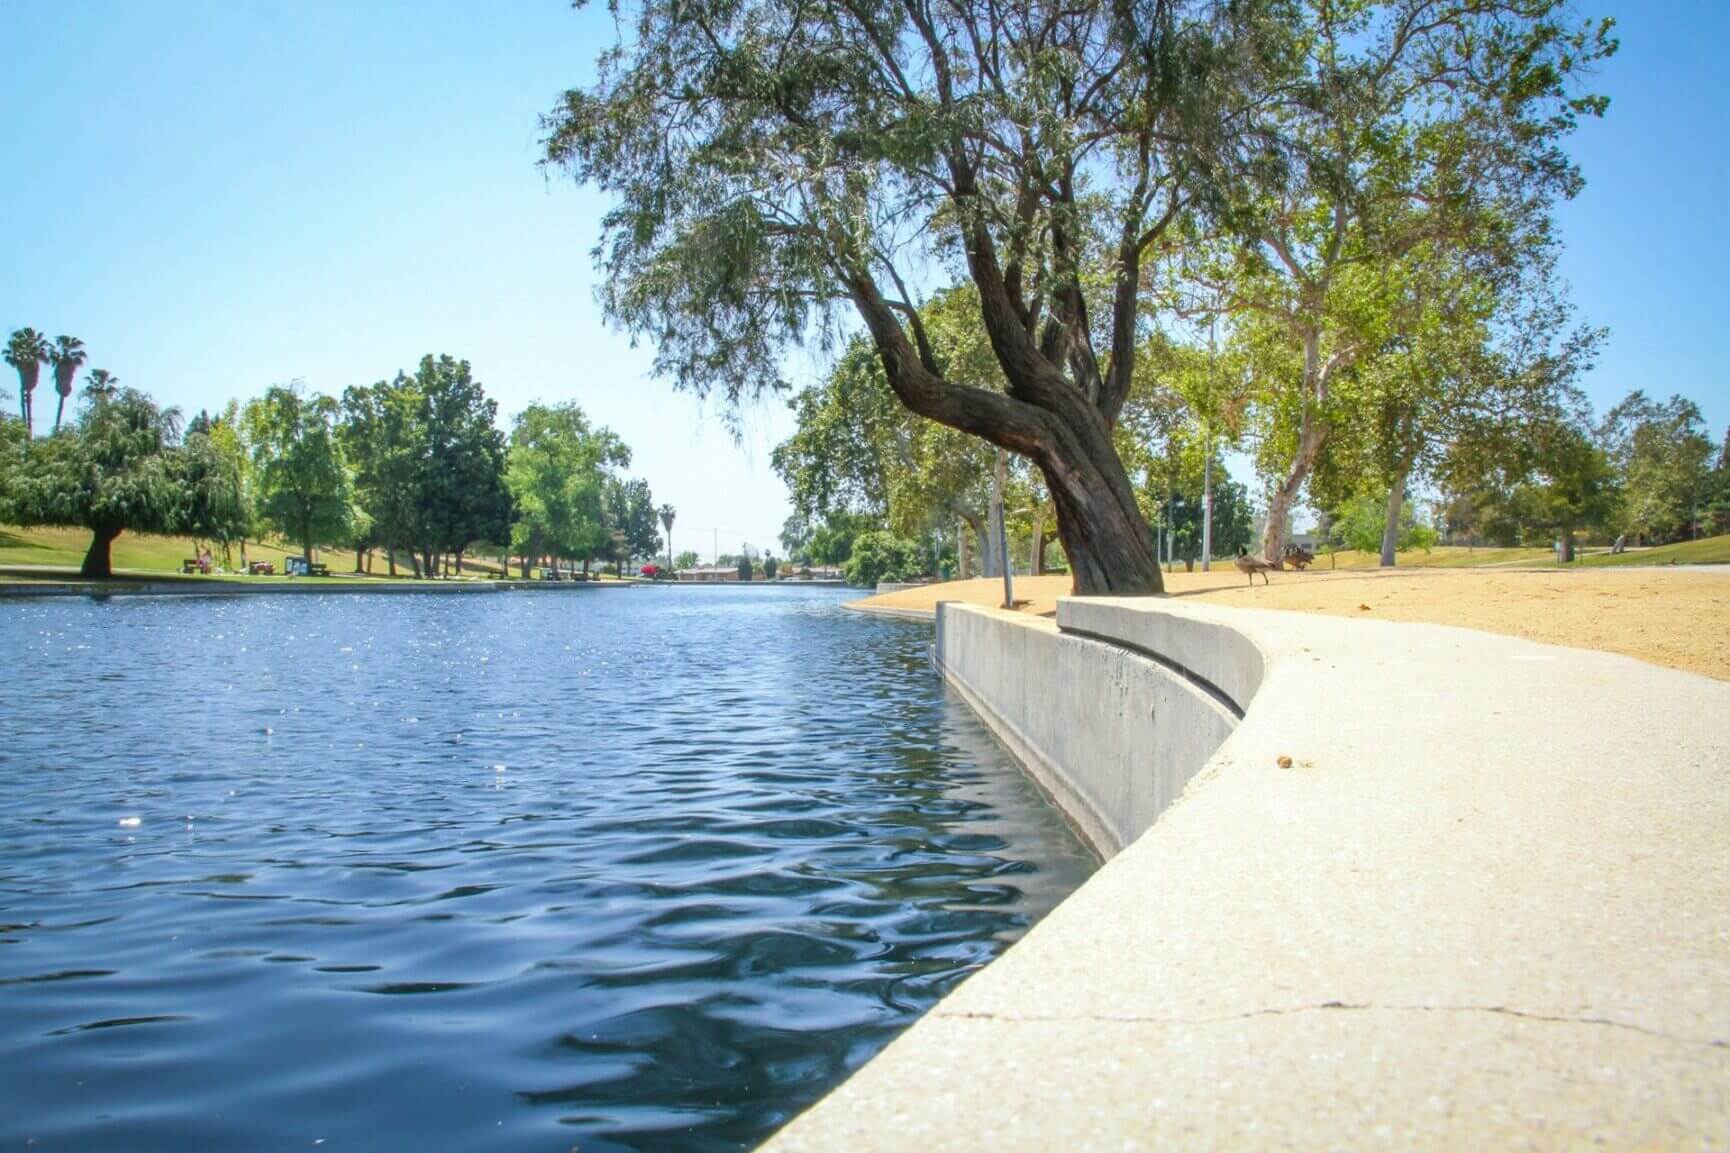 A tree leans over a concrete ledge by a tranquil urban lake on a sunny day.